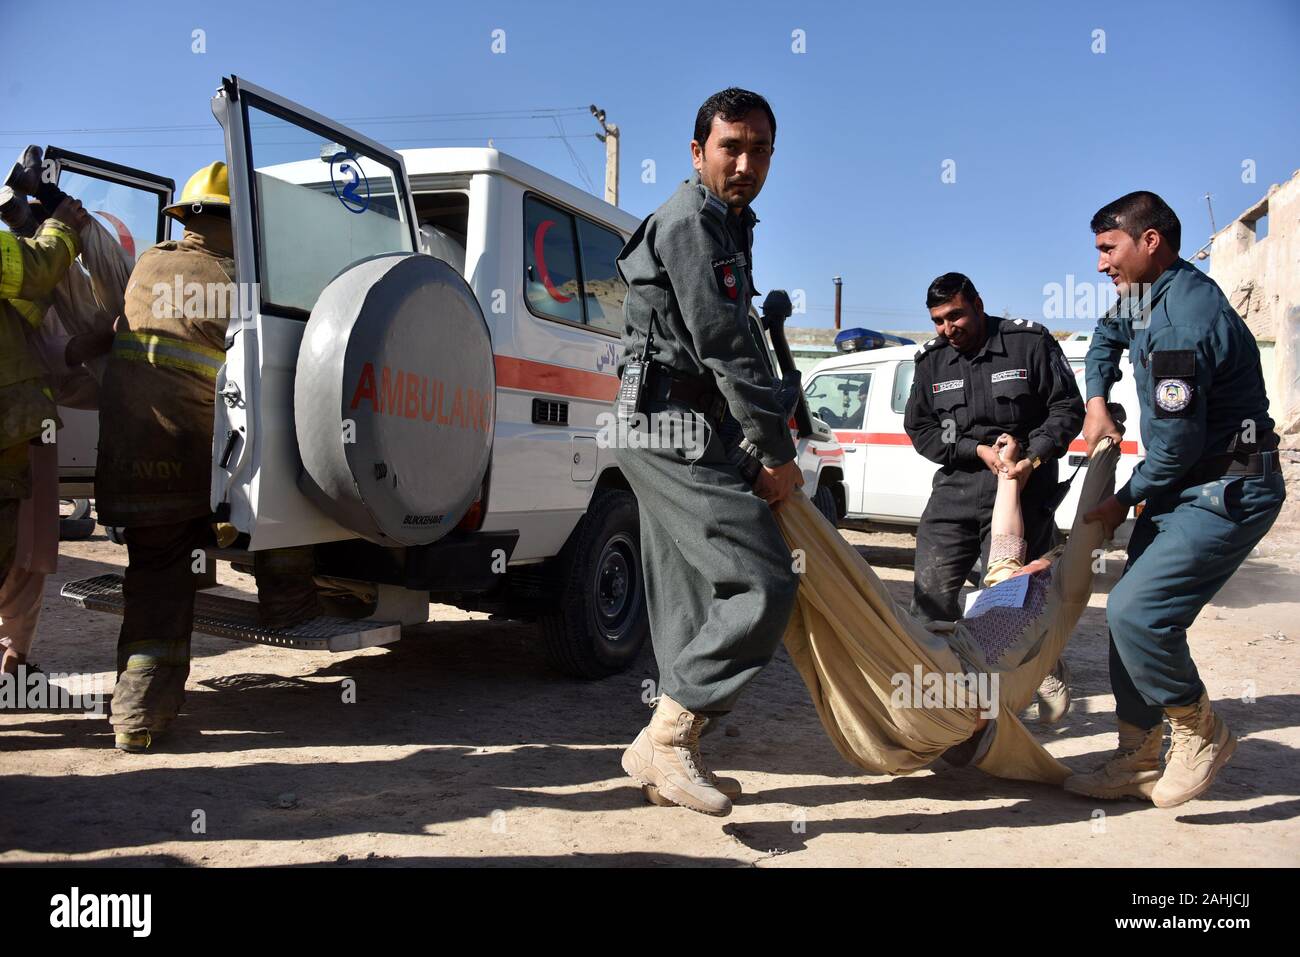 Kandahar, Afghanistan. 29th Dec, 2019. Afghan security force members attend a first-aid exercise at Mirwais Regional Hospital in Kandahar, Afghanistan, Dec. 29, 2019. Credit: Sanaullah Sieam/Xinhua/Alamy Live News Stock Photo